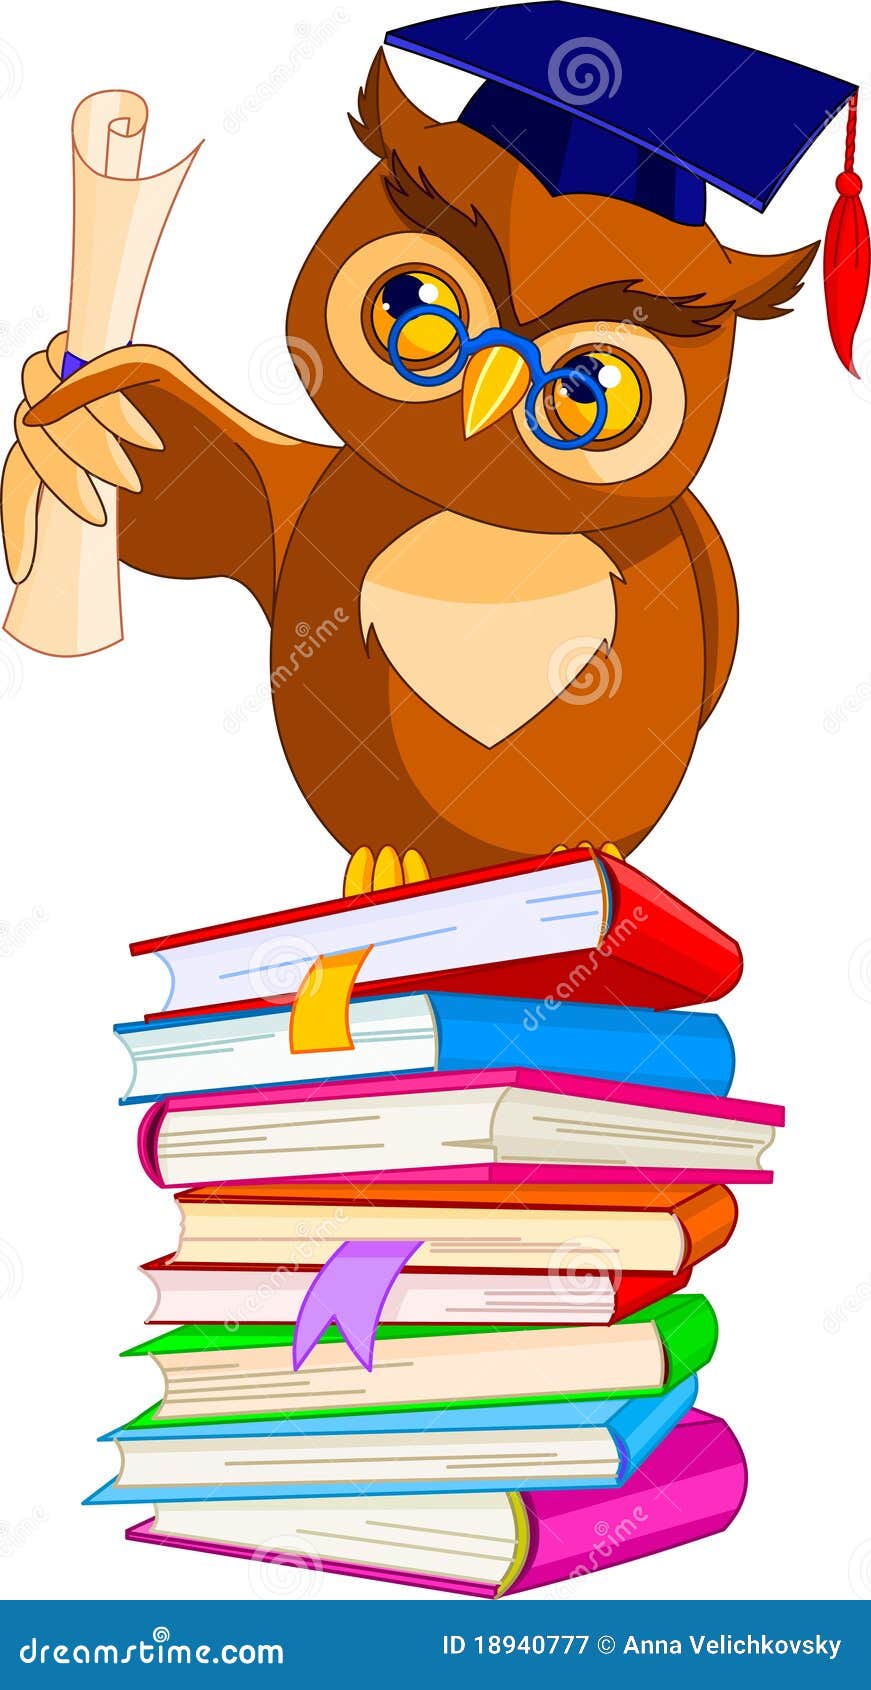 Cartoon Wise Owl With Graduation Cap And Diploma Royalty Free Stock